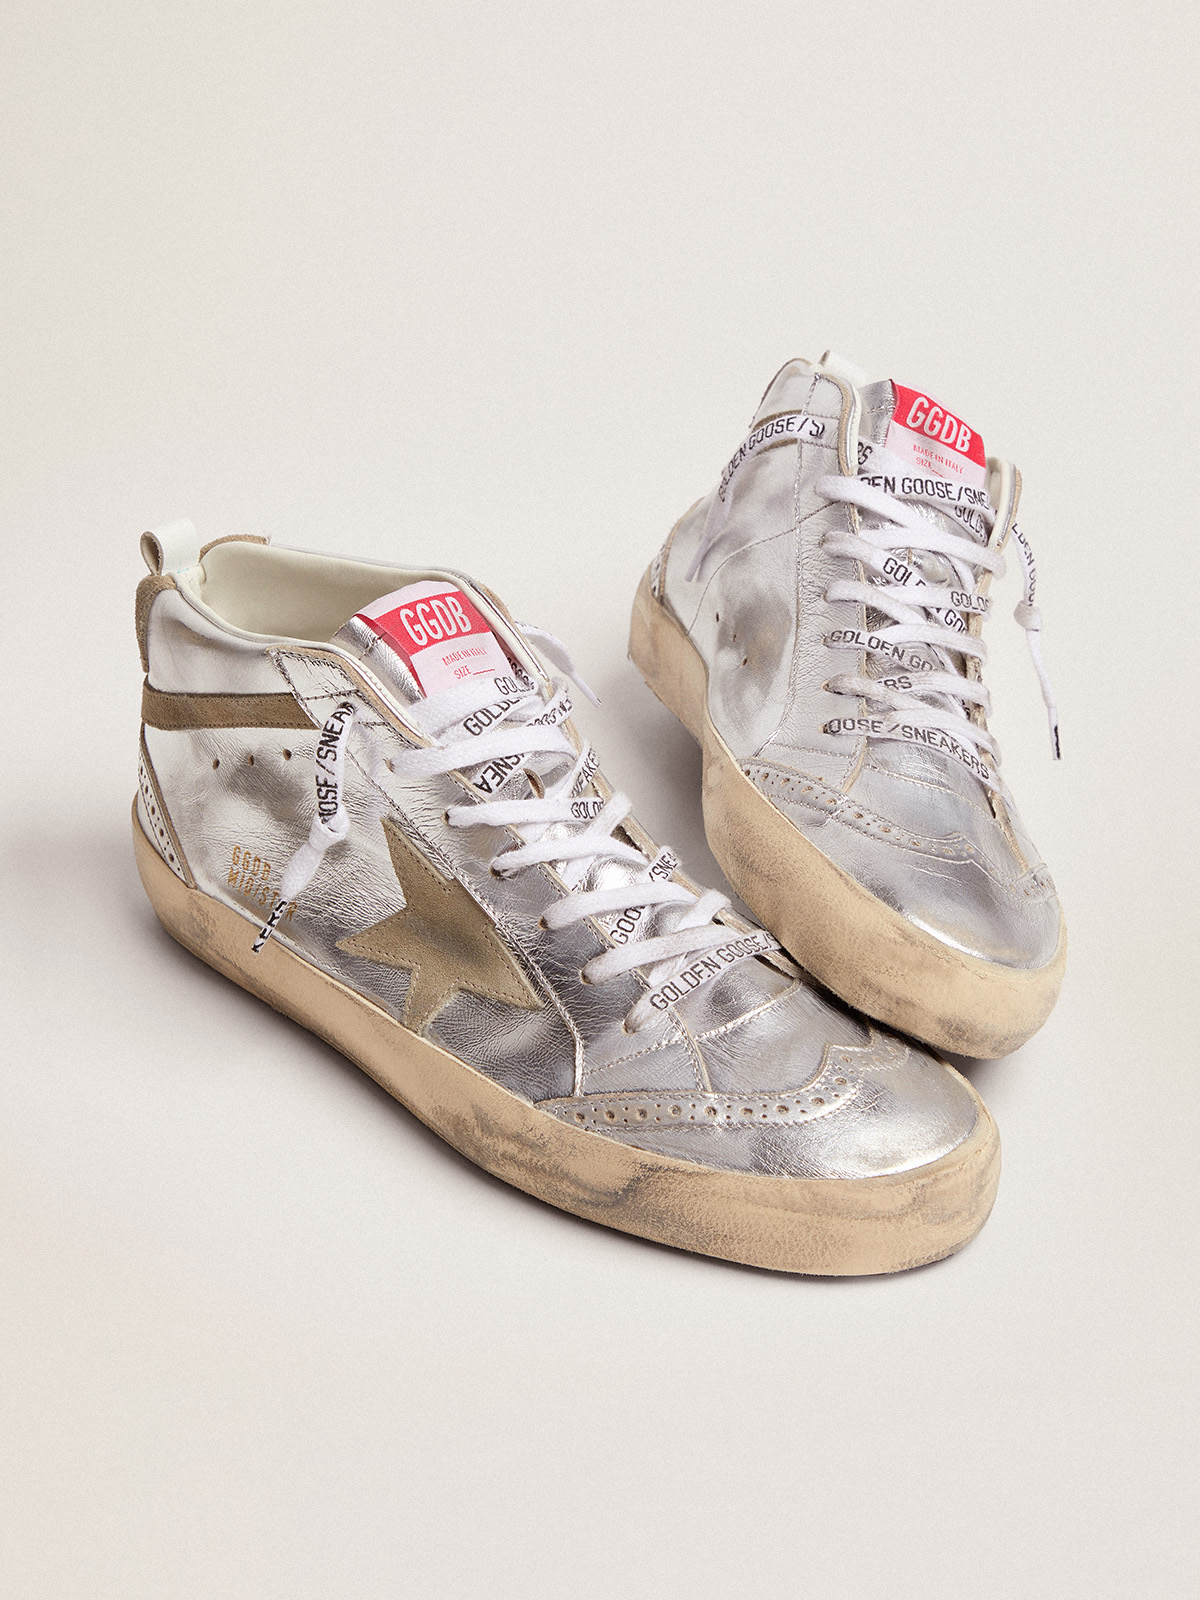 Star: Grey & Silver Leather - Star Miracle Trainers